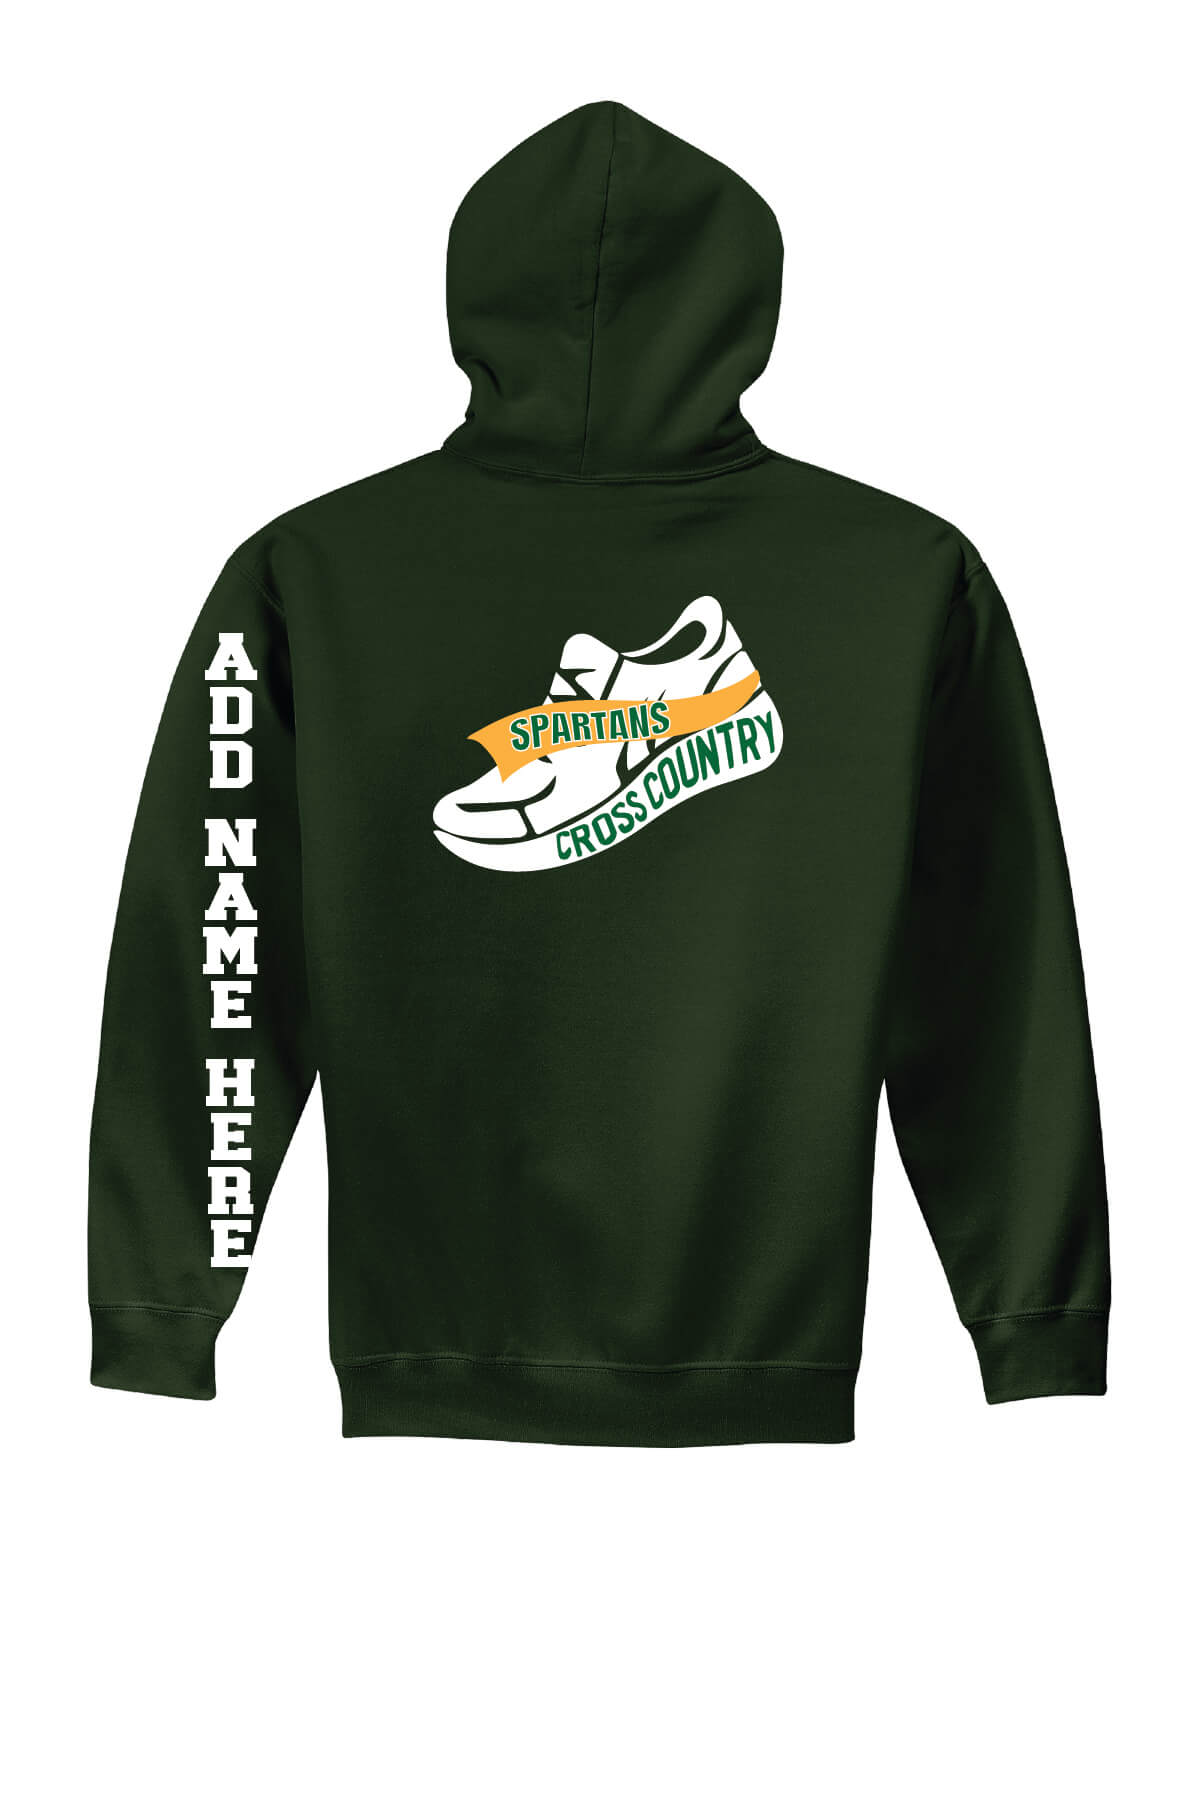 Notre Dame XC Hoodie back-green